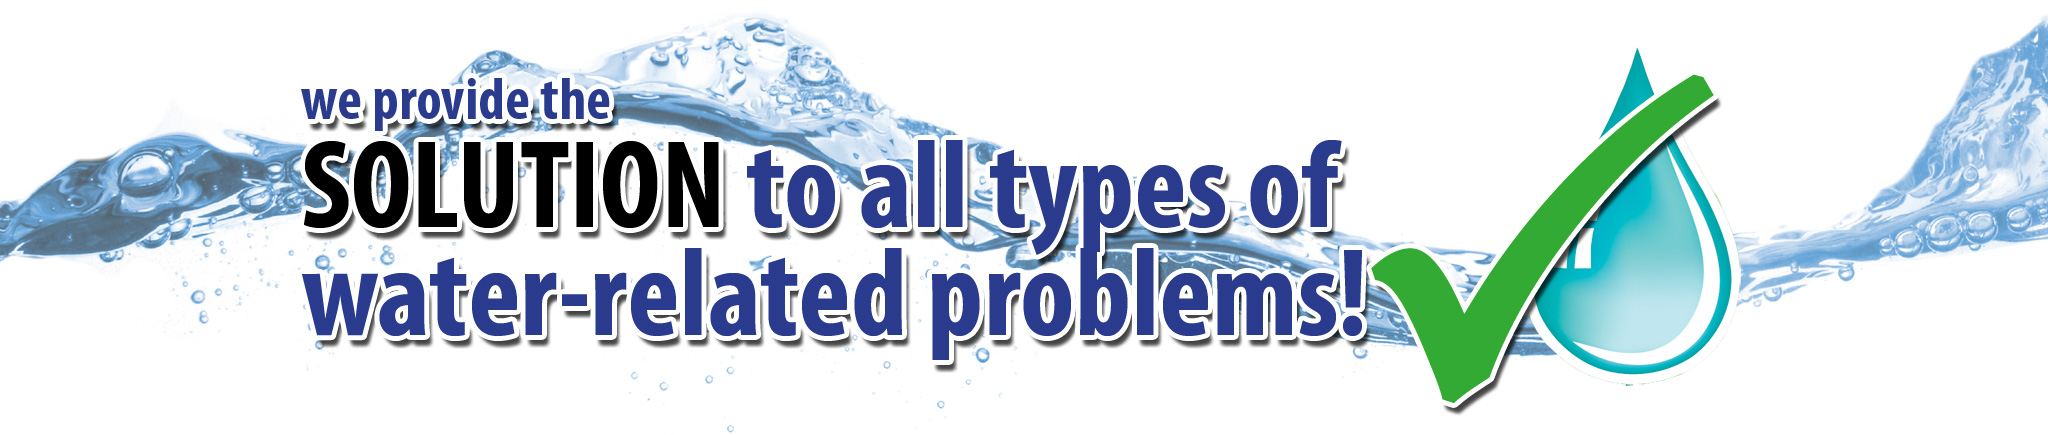 We provide the solution to all types of water-related problems-Reverse Osmosis Systems